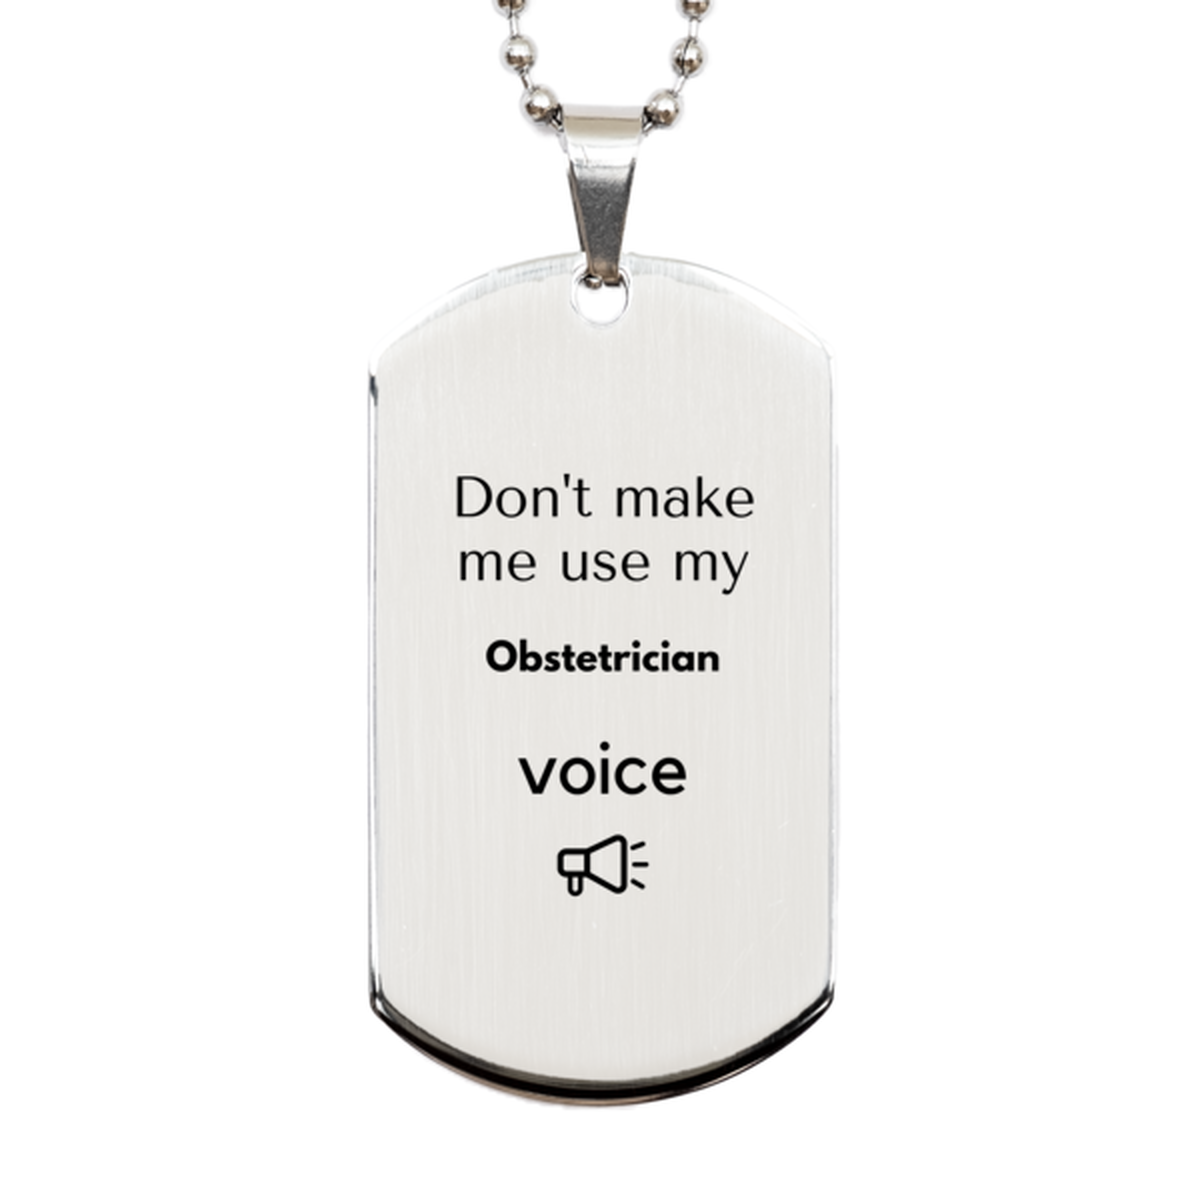 Don't make me use my Obstetrician voice, Sarcasm Obstetrician Gifts, Christmas Obstetrician Silver Dog Tag Birthday Unique Gifts For Obstetrician Coworkers, Men, Women, Colleague, Friends